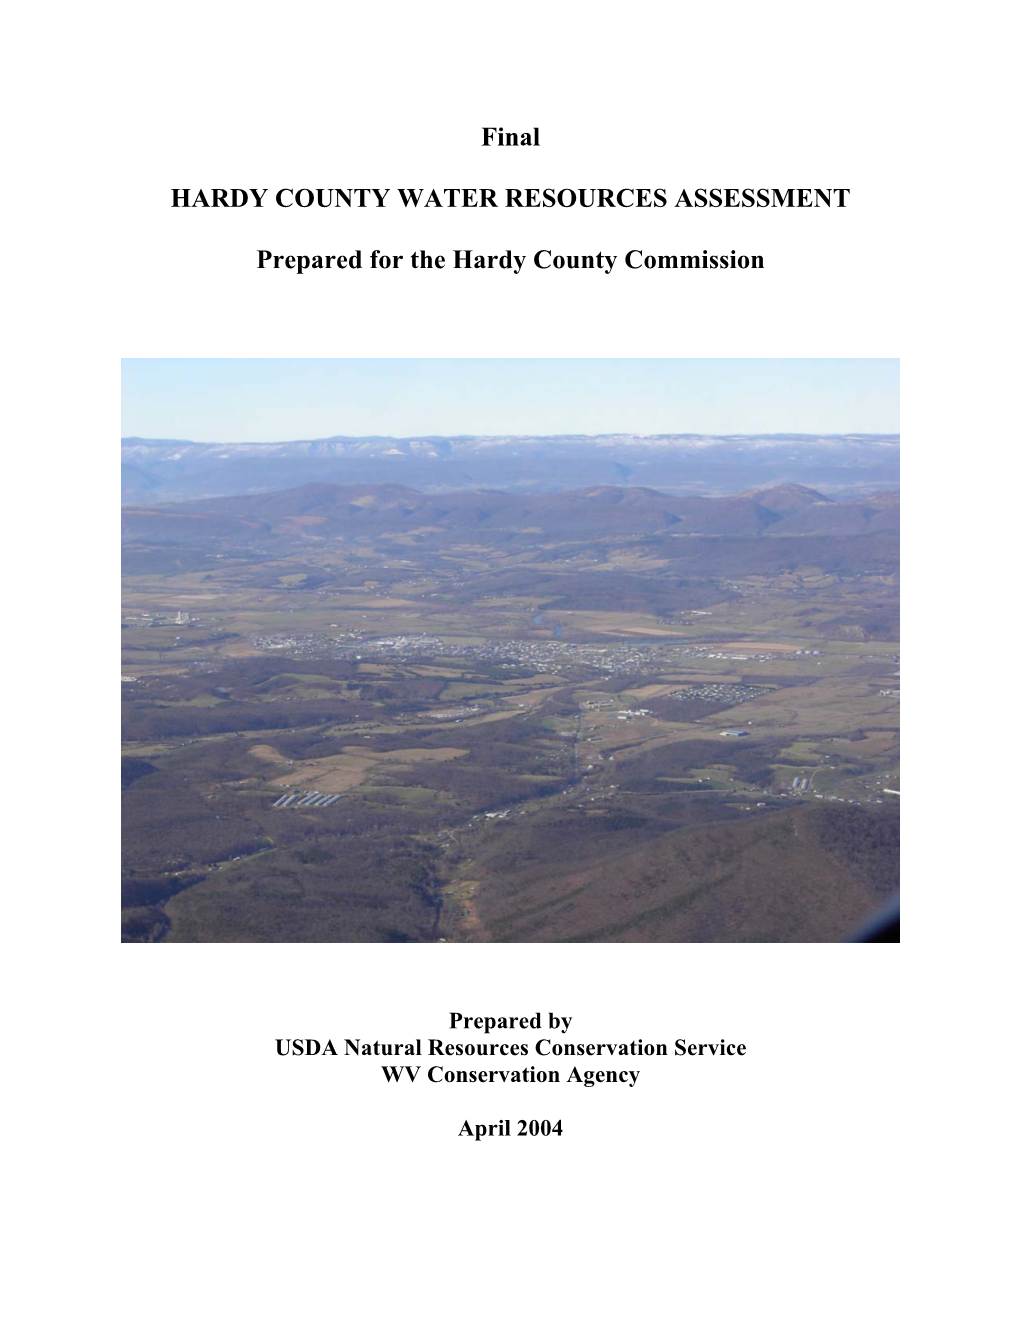 Hardy County Water Resources Assessment